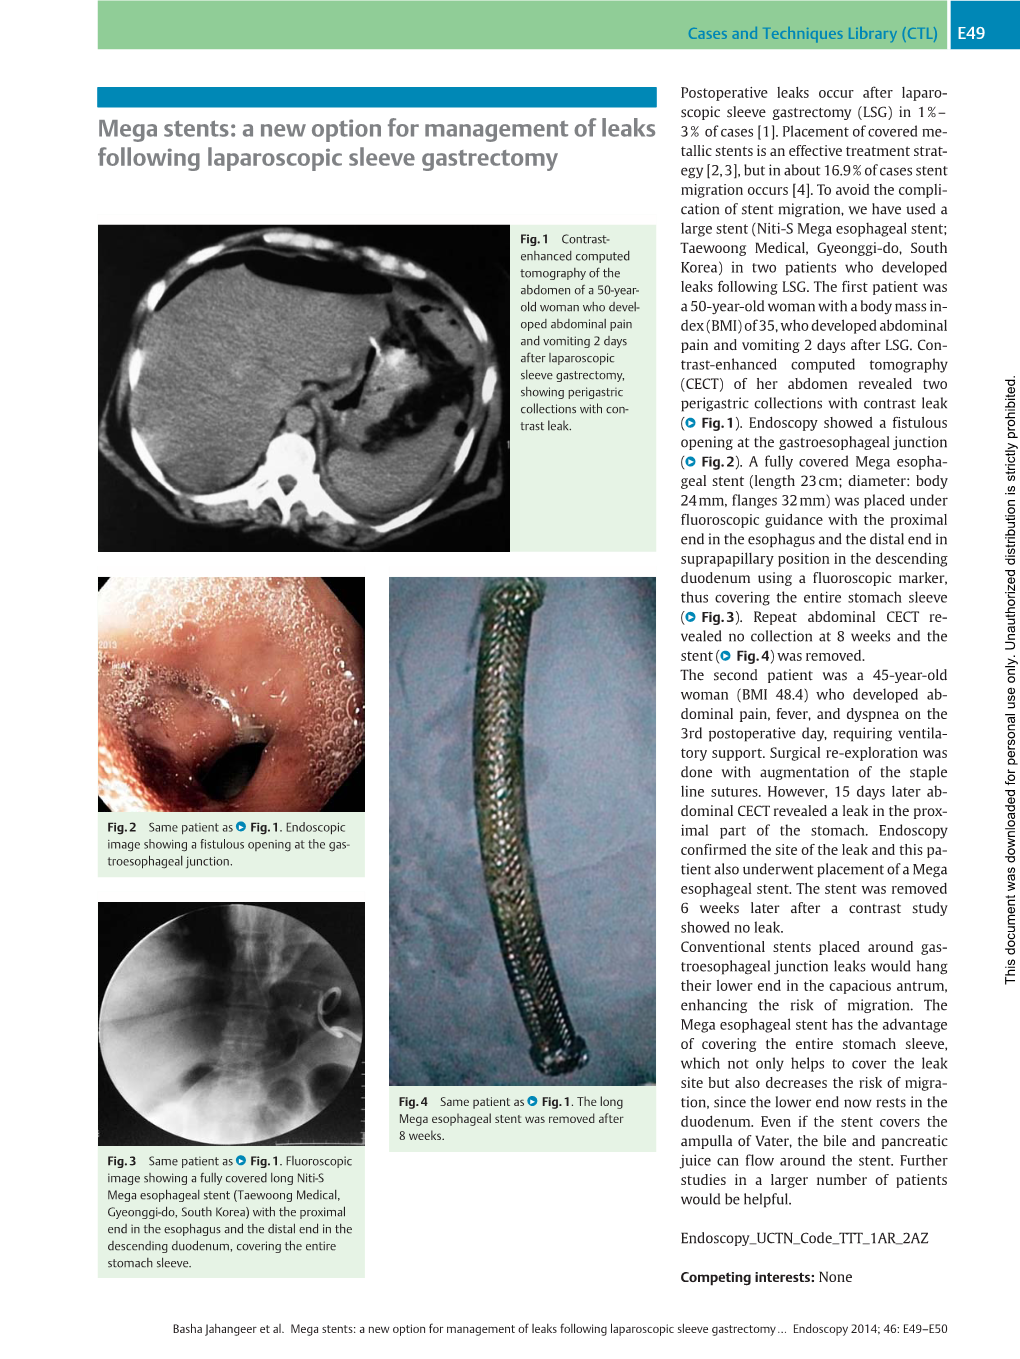 Mega Stents: a New Option for Management of Leaks Following Laparoscopic Sleeve Gastrectomy… Endoscopy 2014; 46: E49–E50 E50 Cases and Techniques Library (CTL)